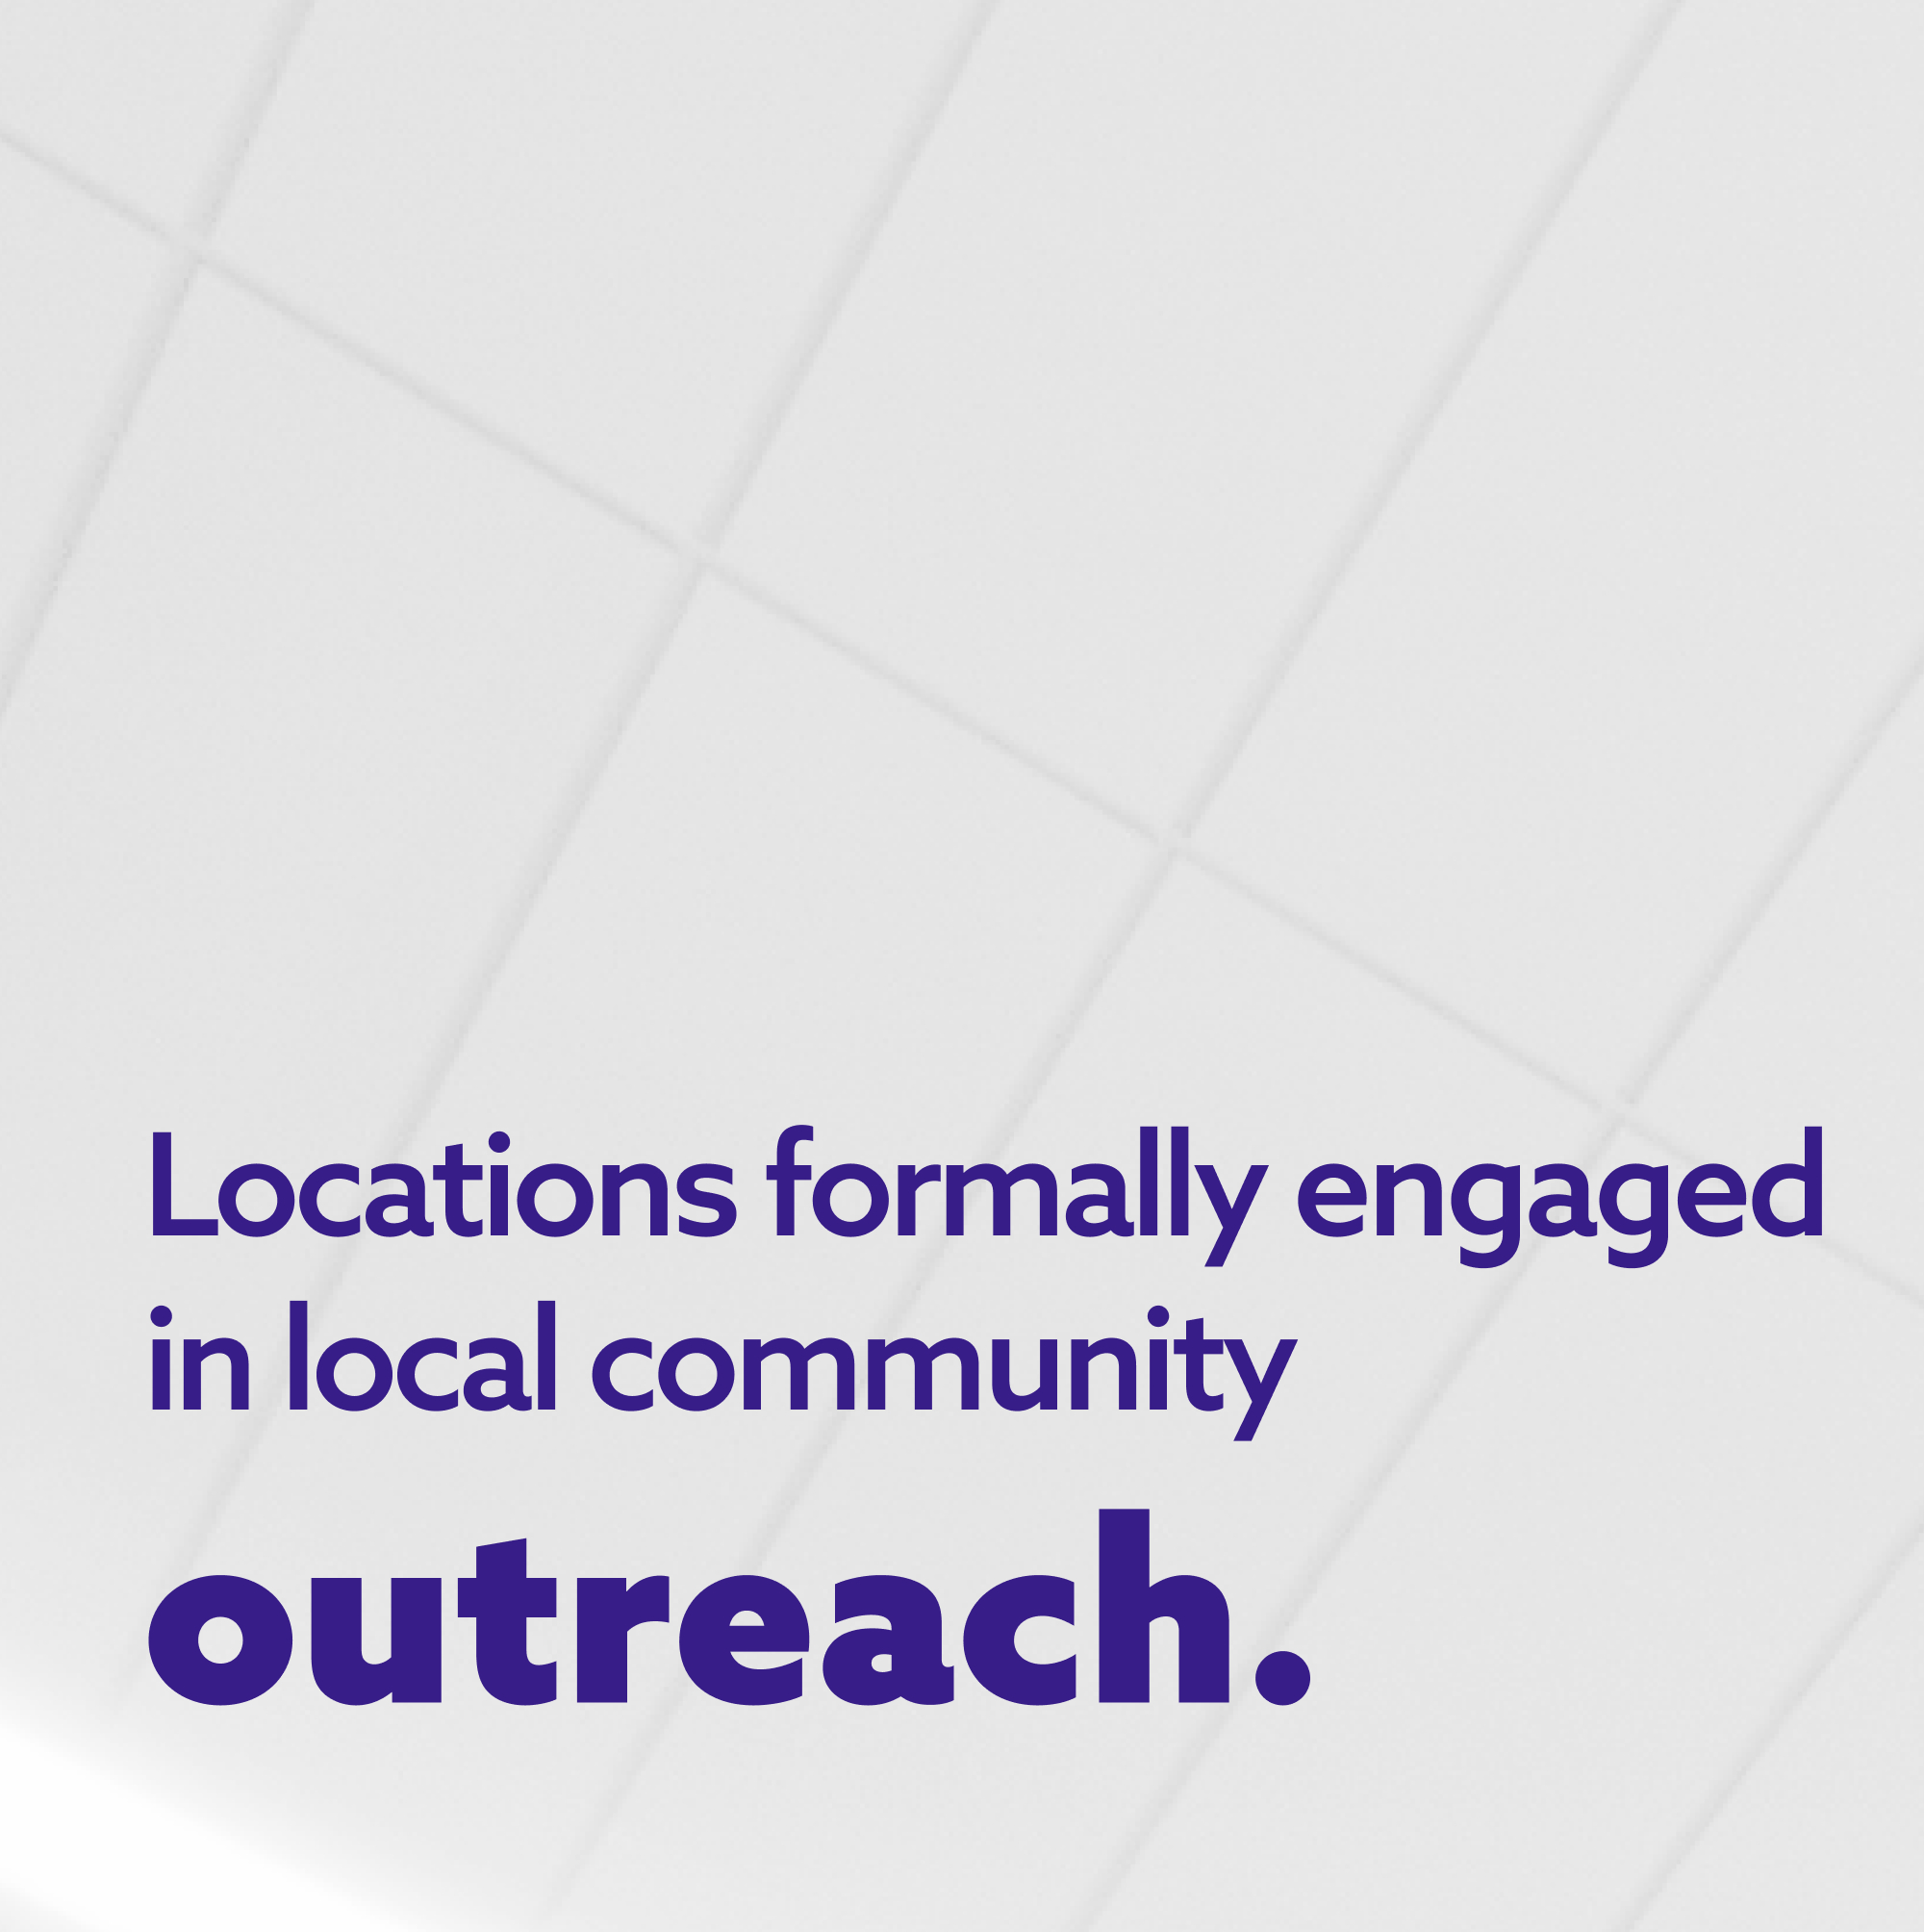 Locations formally engaged in local community outreach.